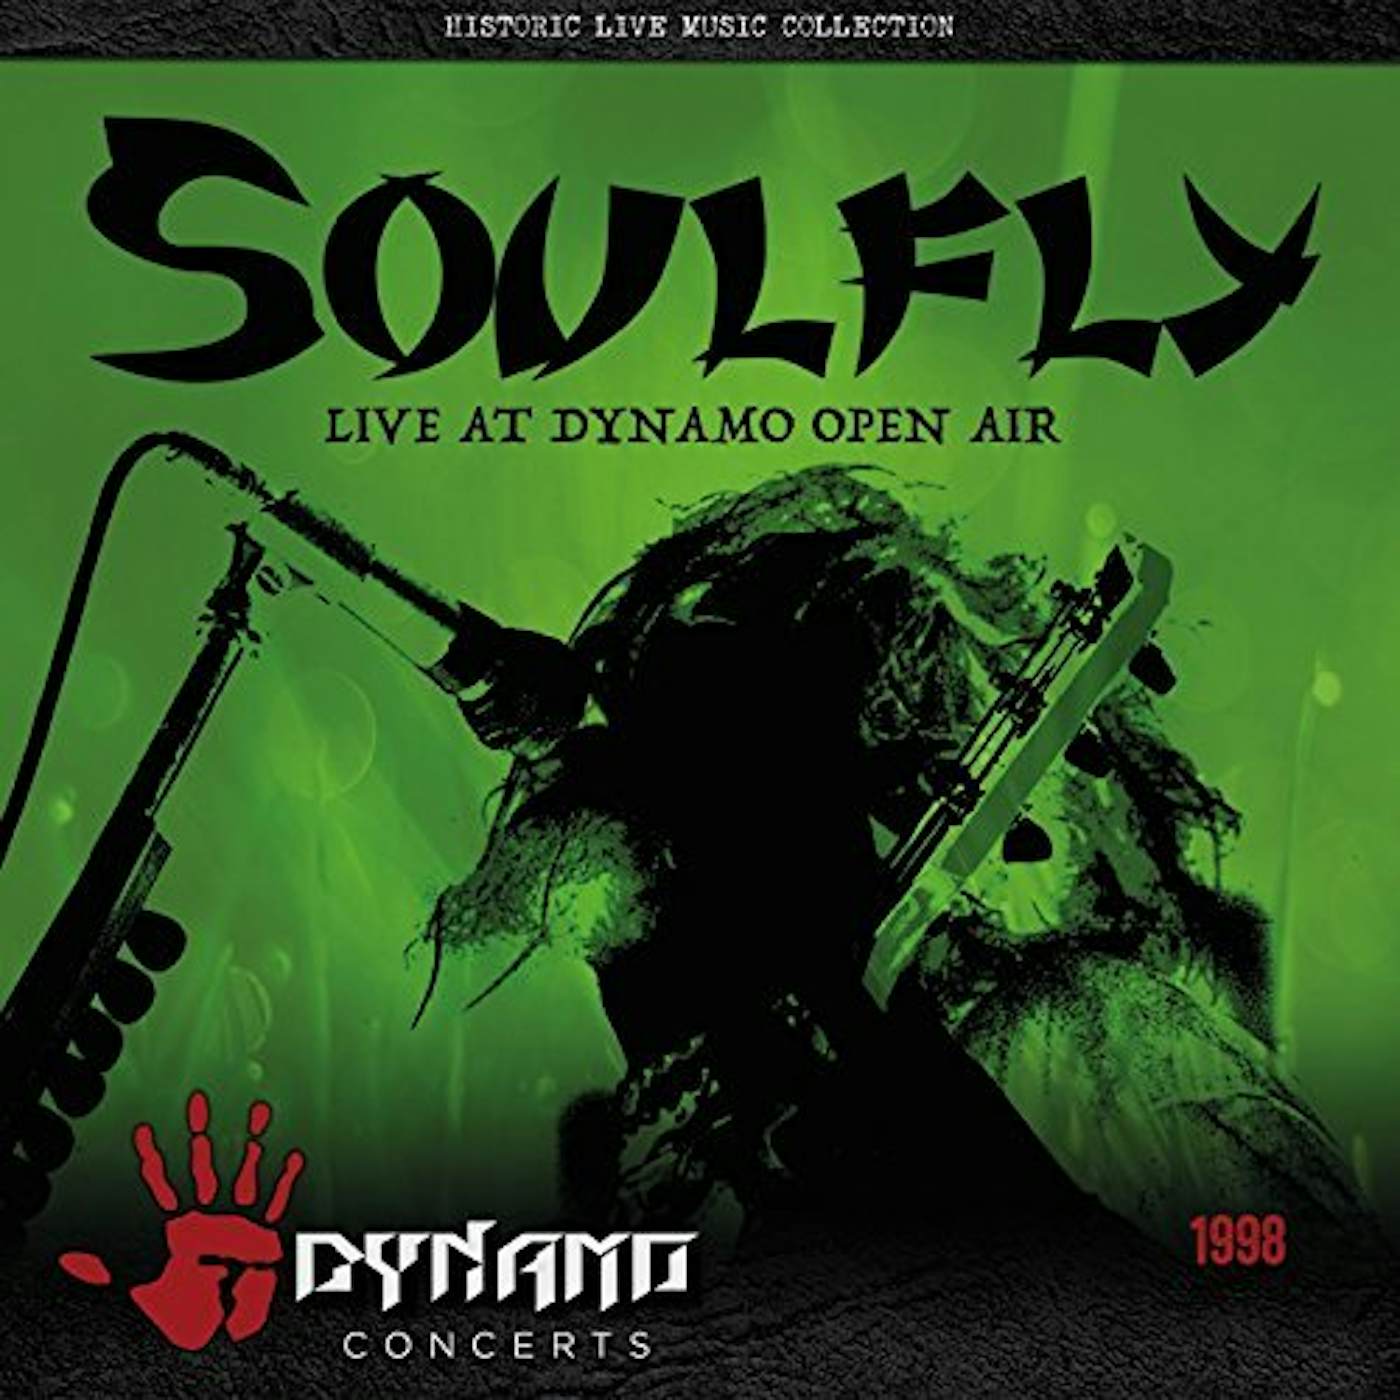 Soulfly LIVE AT DYNAMO OPEN AIR 1998 CD